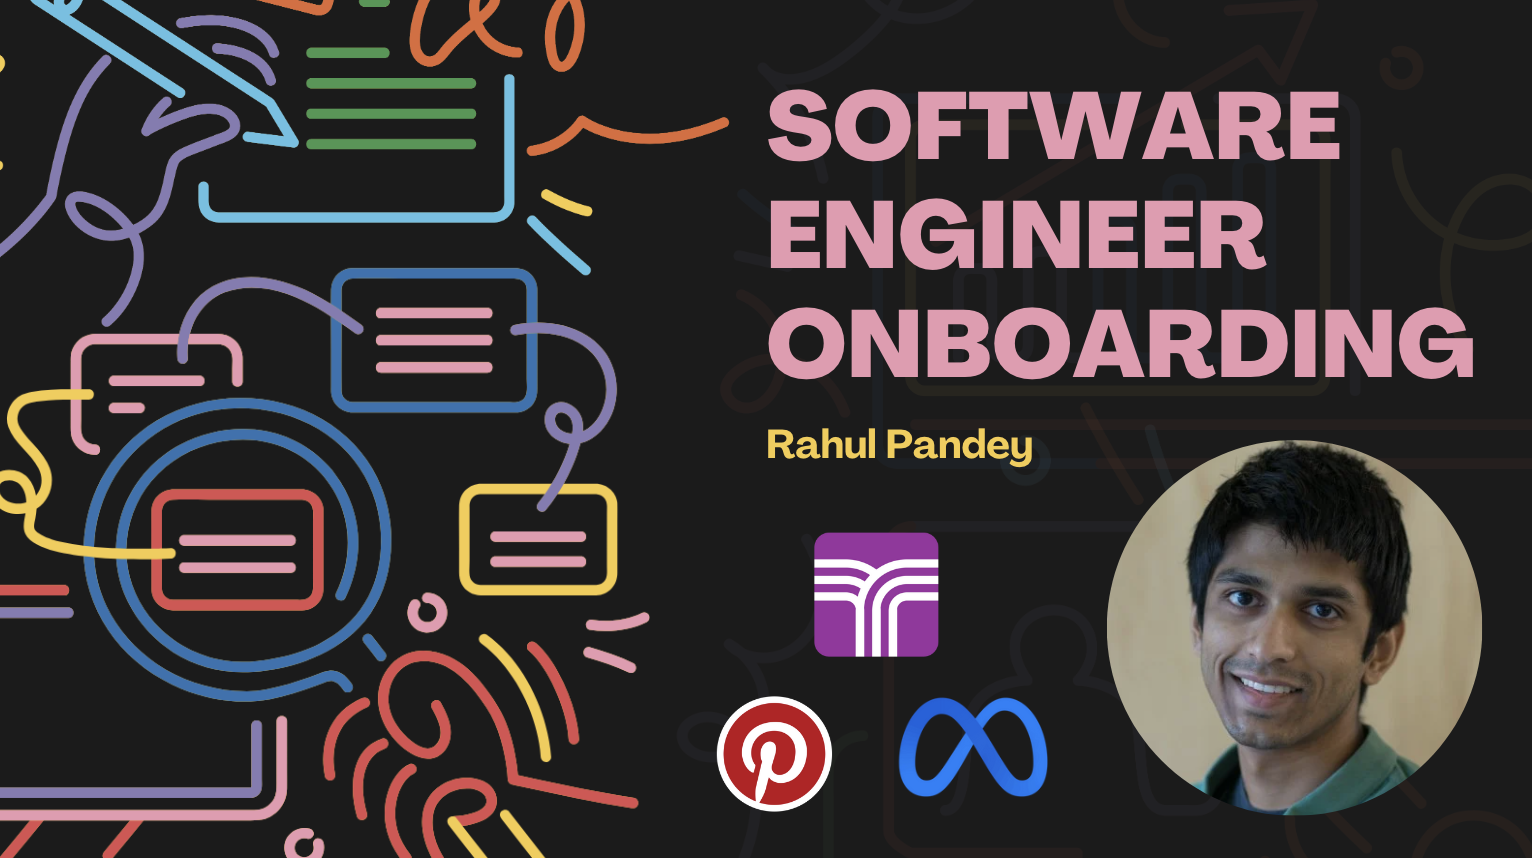 The Complete Onboarding Guide For Software Engineers poster